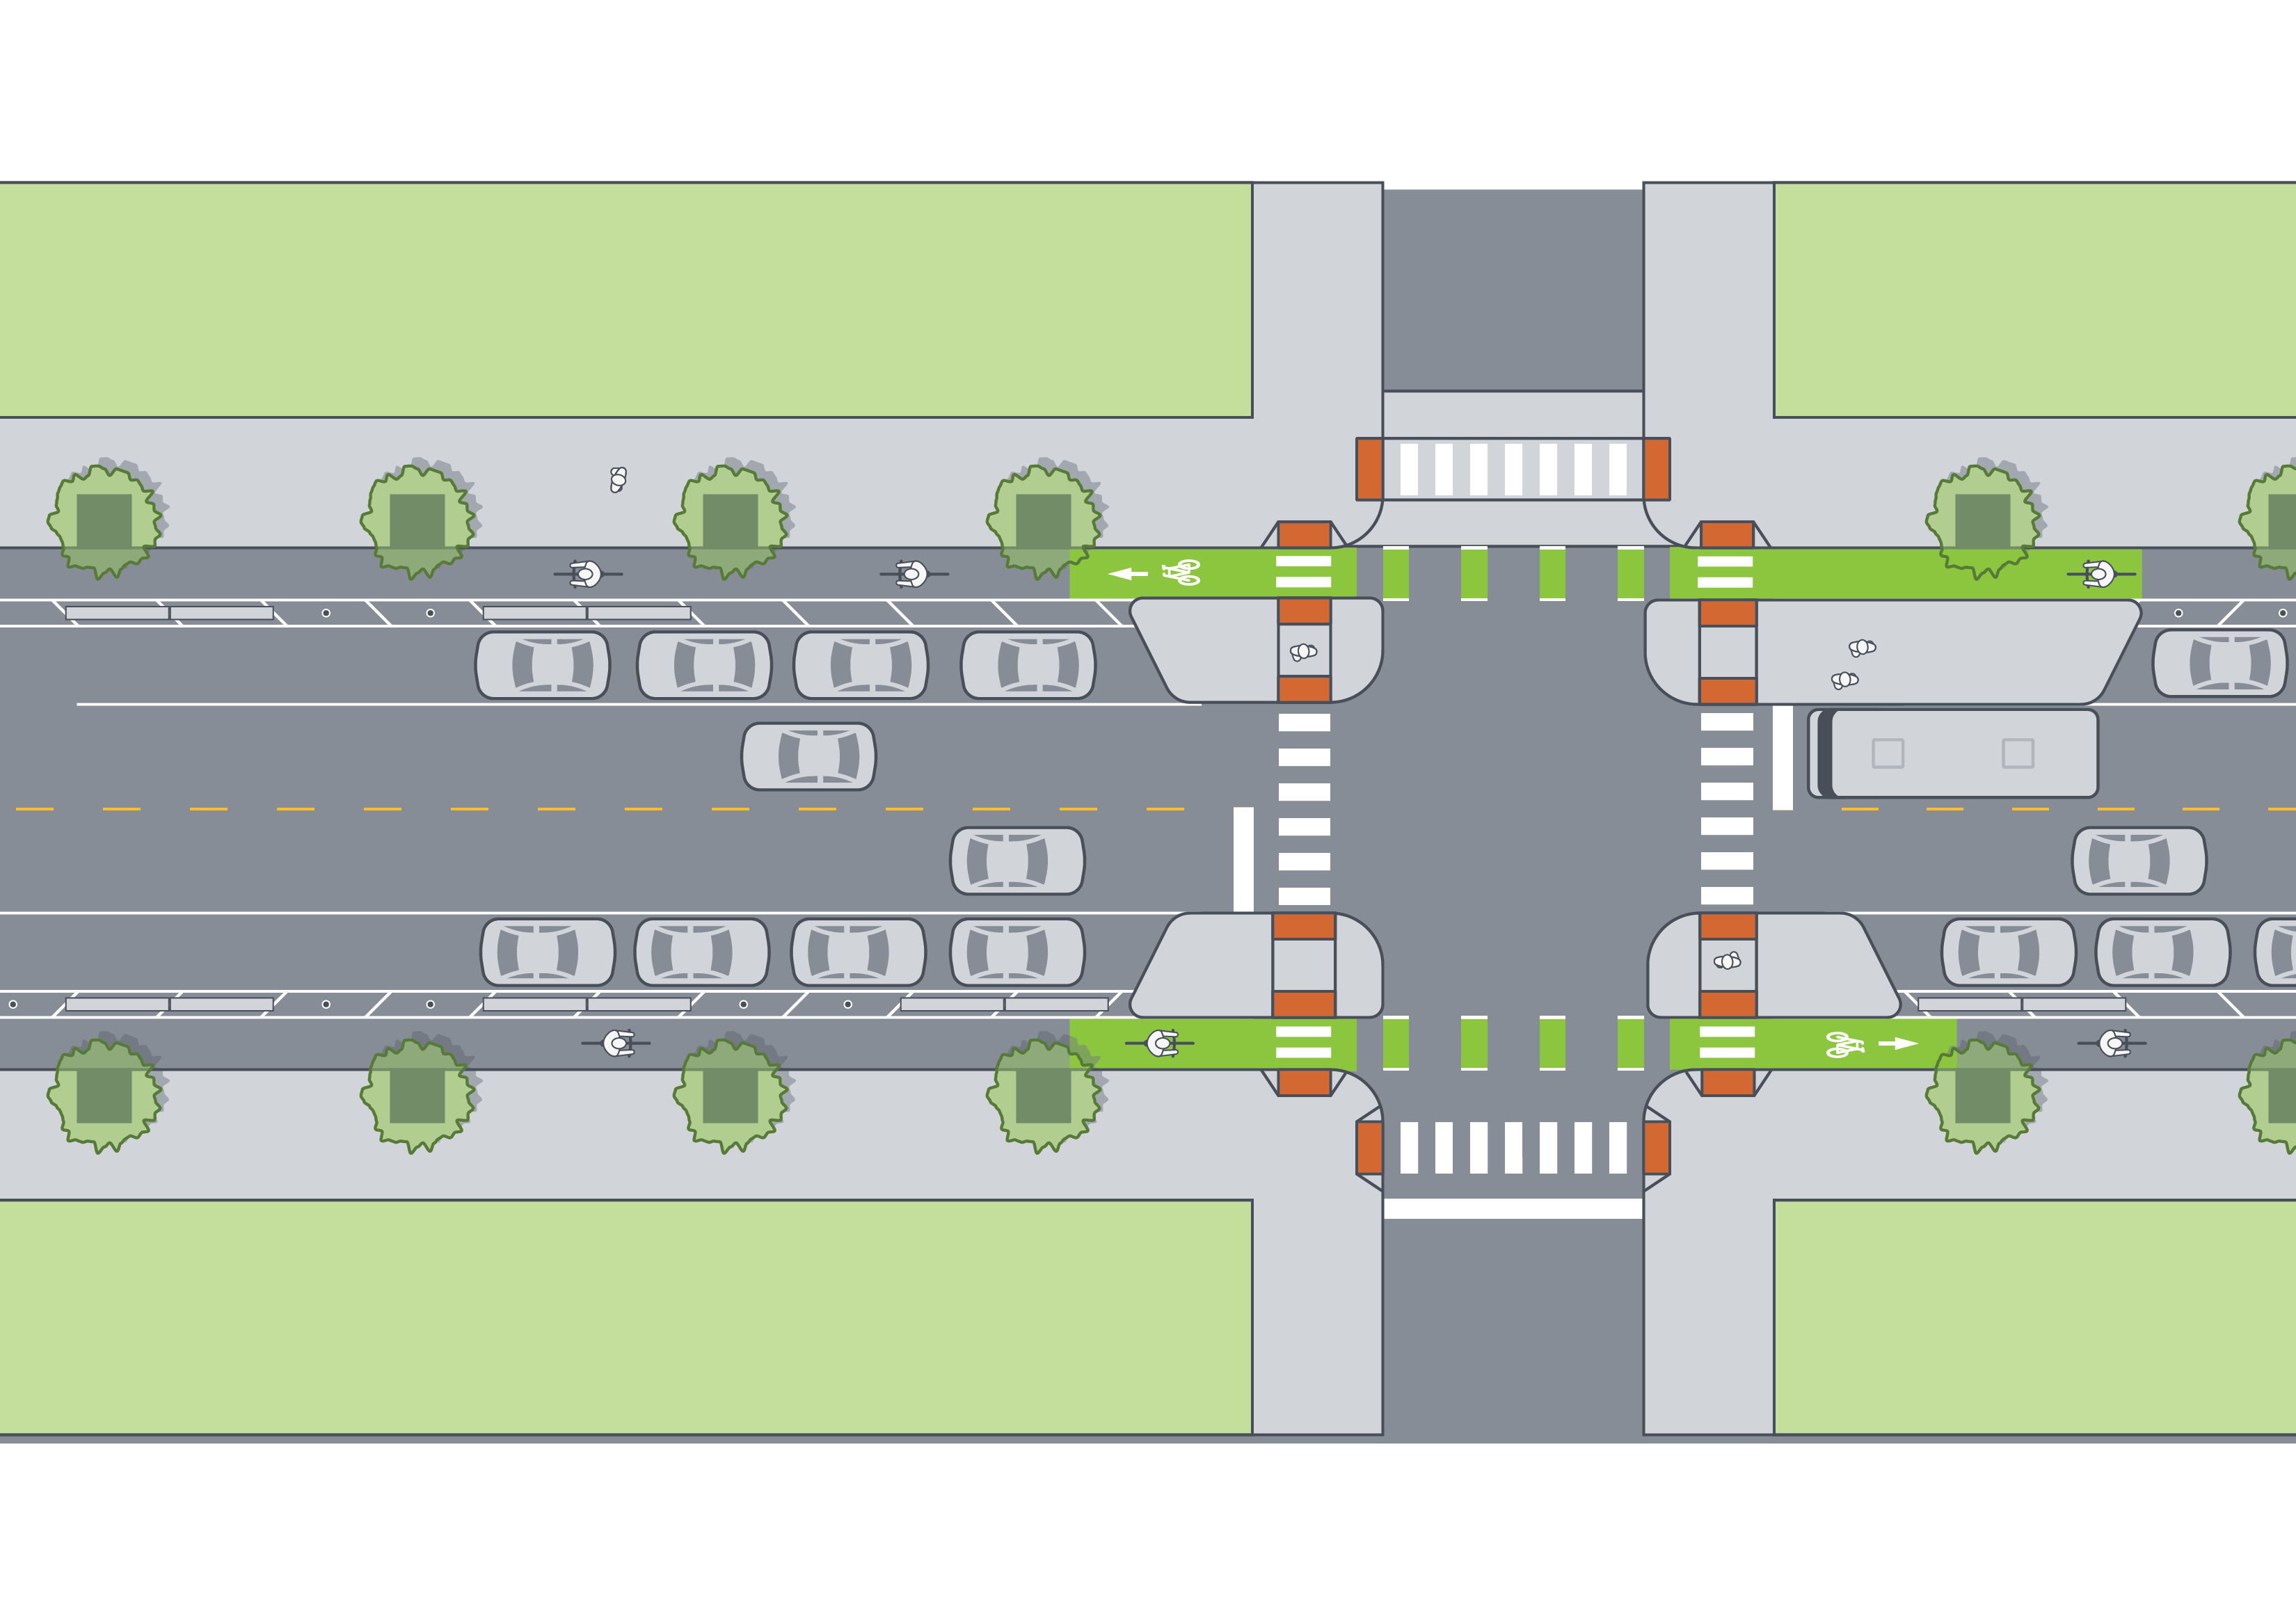 Aerial diagram of an intersection, including a protected bikeway that runs in between the sidewalk and a raised concrete bus boarding island. There is a a special crosswalk over the bikeway for people to access the bus boarding island. People wait for the bus on the bus boarding island, the bus pulls up next to the island for boarding and alighting. 